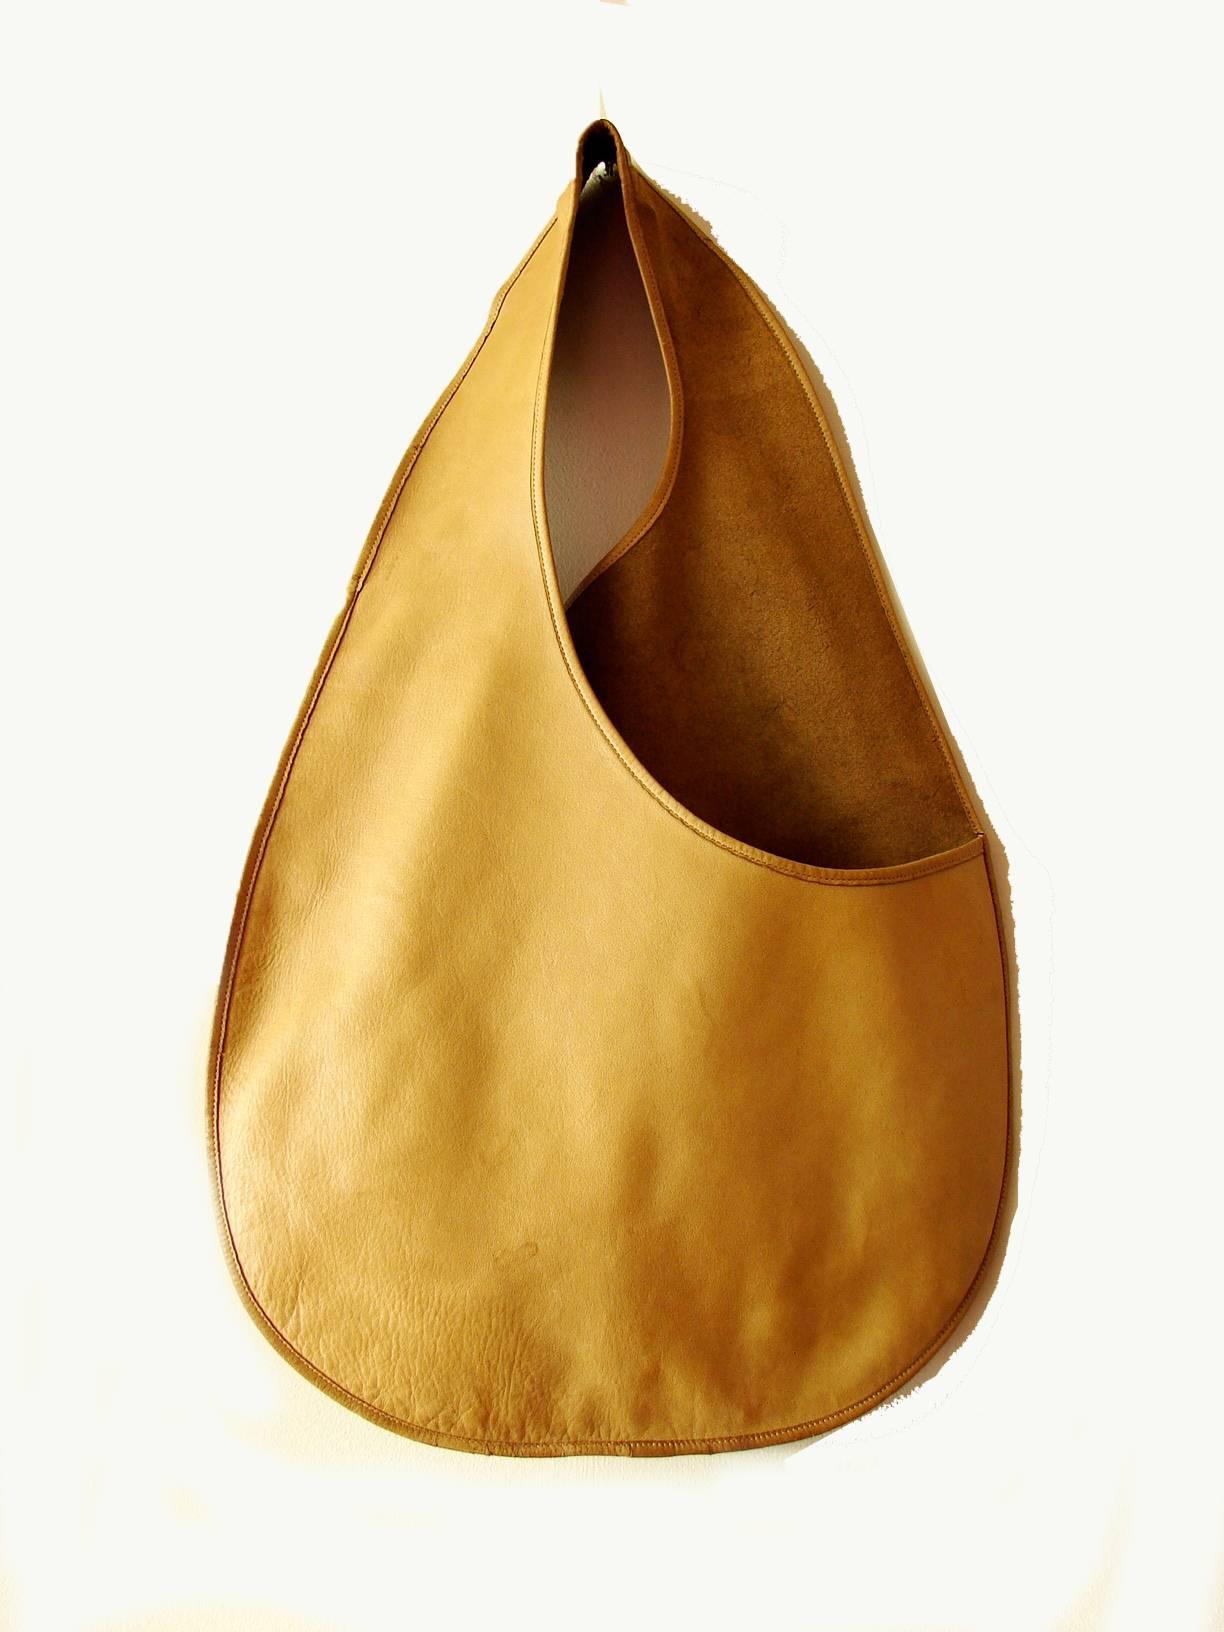 This mod sling bag was designed by Bonnie Cashin during her time at Coach Leatherware circa mid 1960s.   According to an article in ELLE magazine from 2011, FIT has one of these bags in their museum collection, and I believe another lives within the